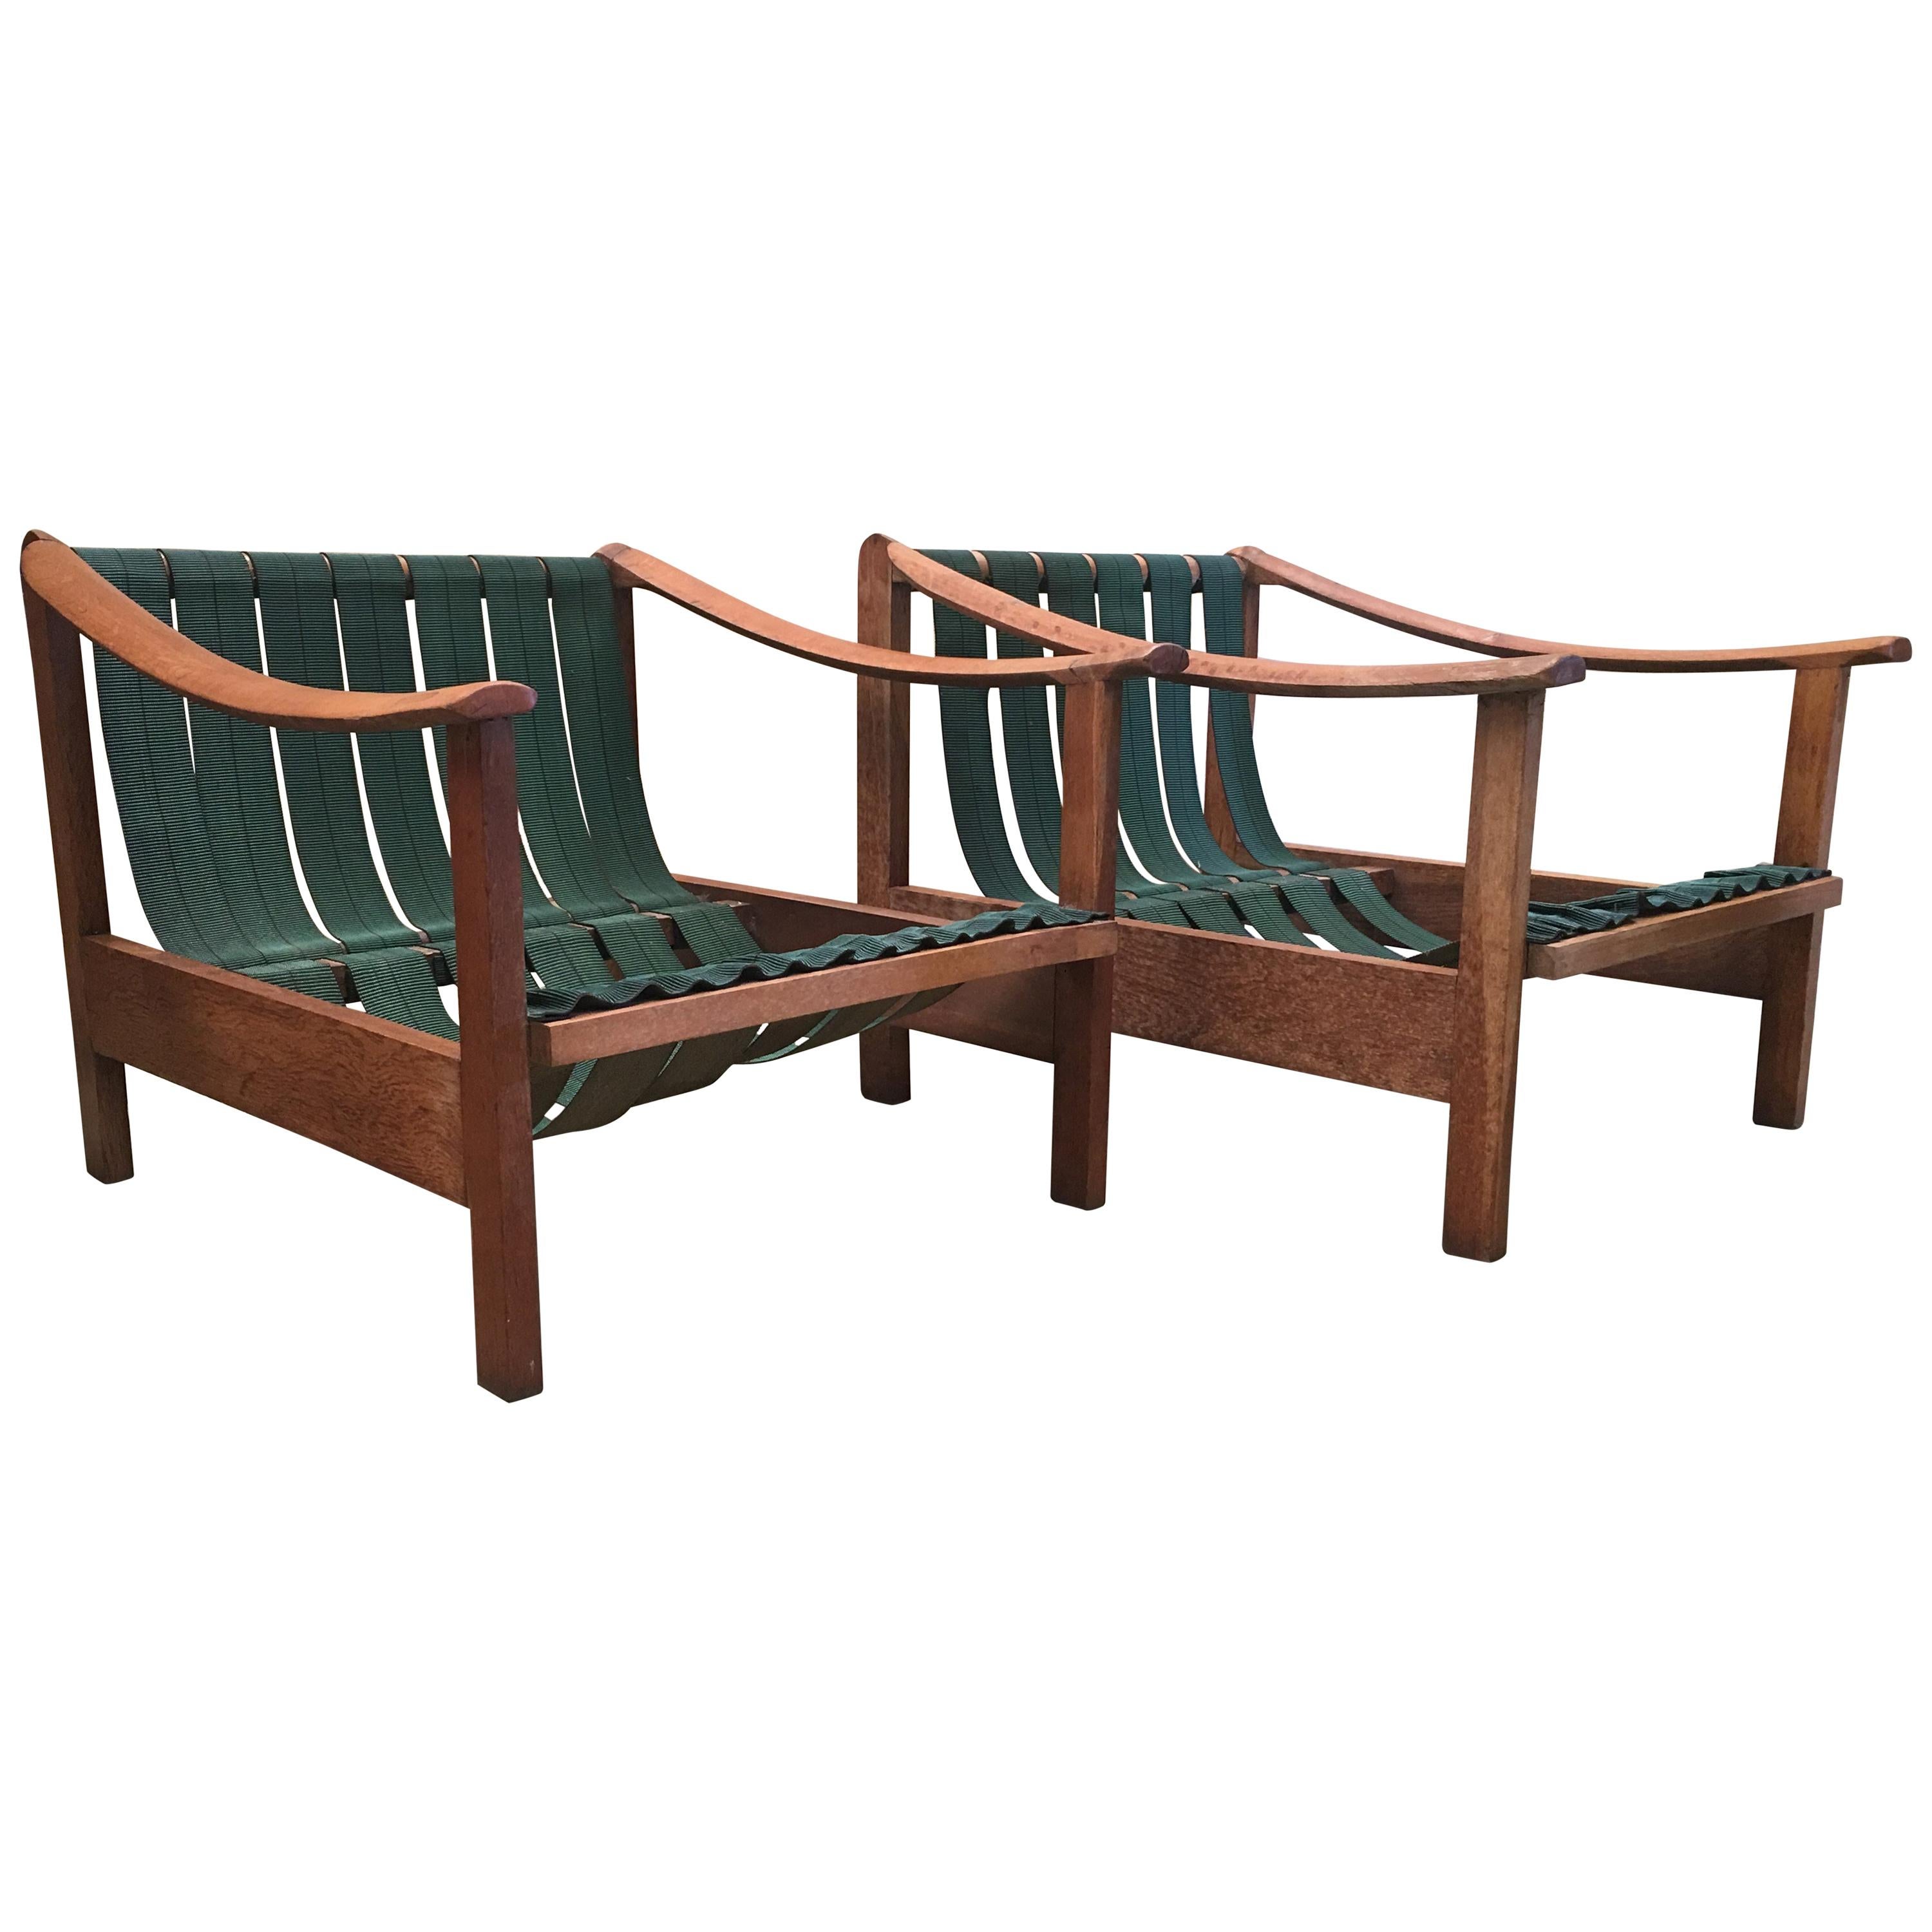 20th Century Vintage Danish Teak Armchairs with Straps and Cushions For Sale